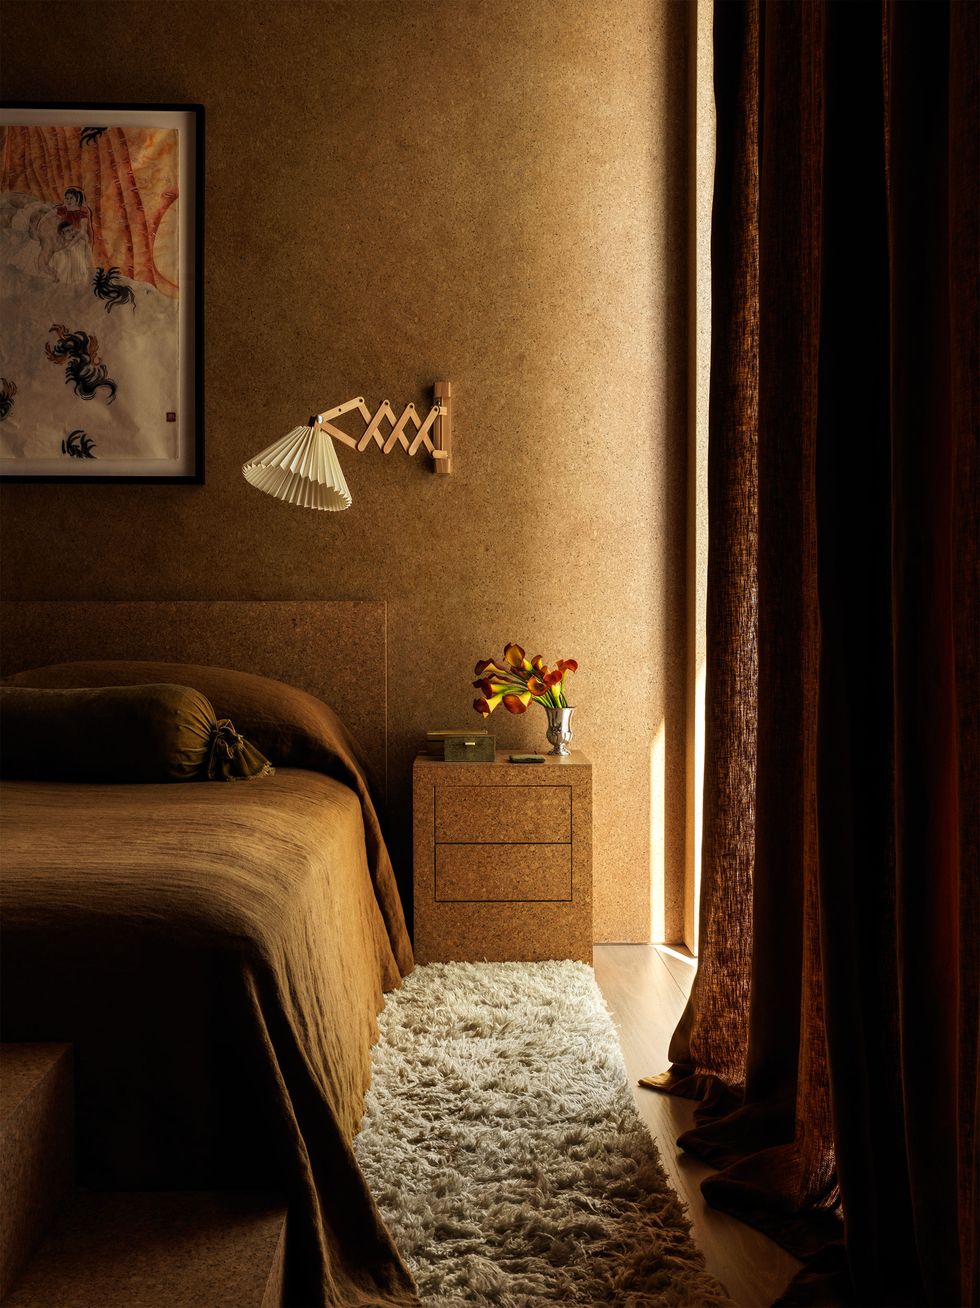 a bedroom has cork wallcovering and a cork headboard and nightstand, a sconce with an accordion arm and pleated shade, brown bedcover and curtain, a light shag rug, and a painting over bed